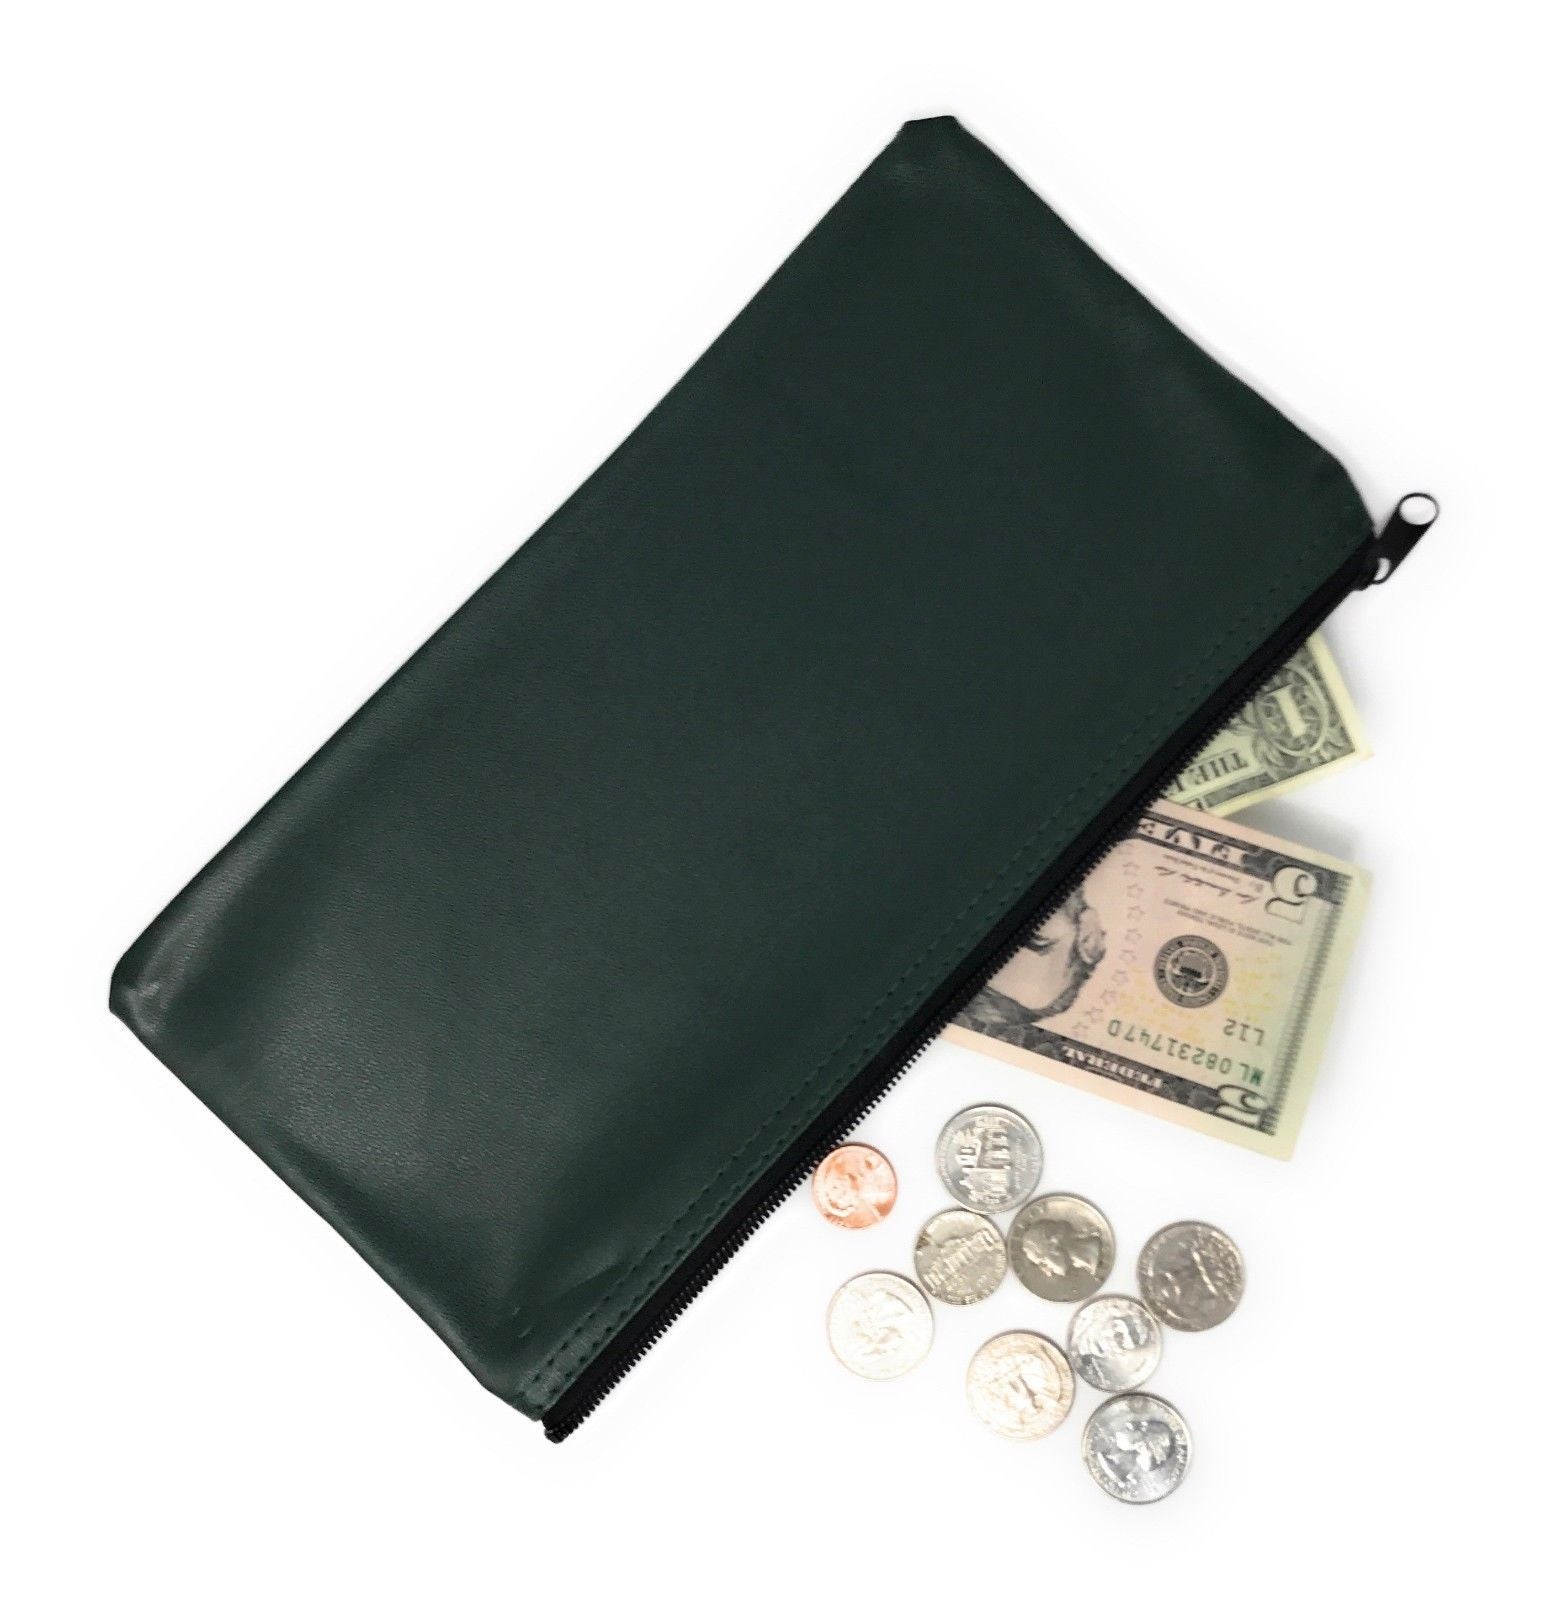 15 CLEAR VINYL ZIPPER WALLET BANK BAG MONEY JEWELRY POUCH COIN CURRENCY COUPONS 